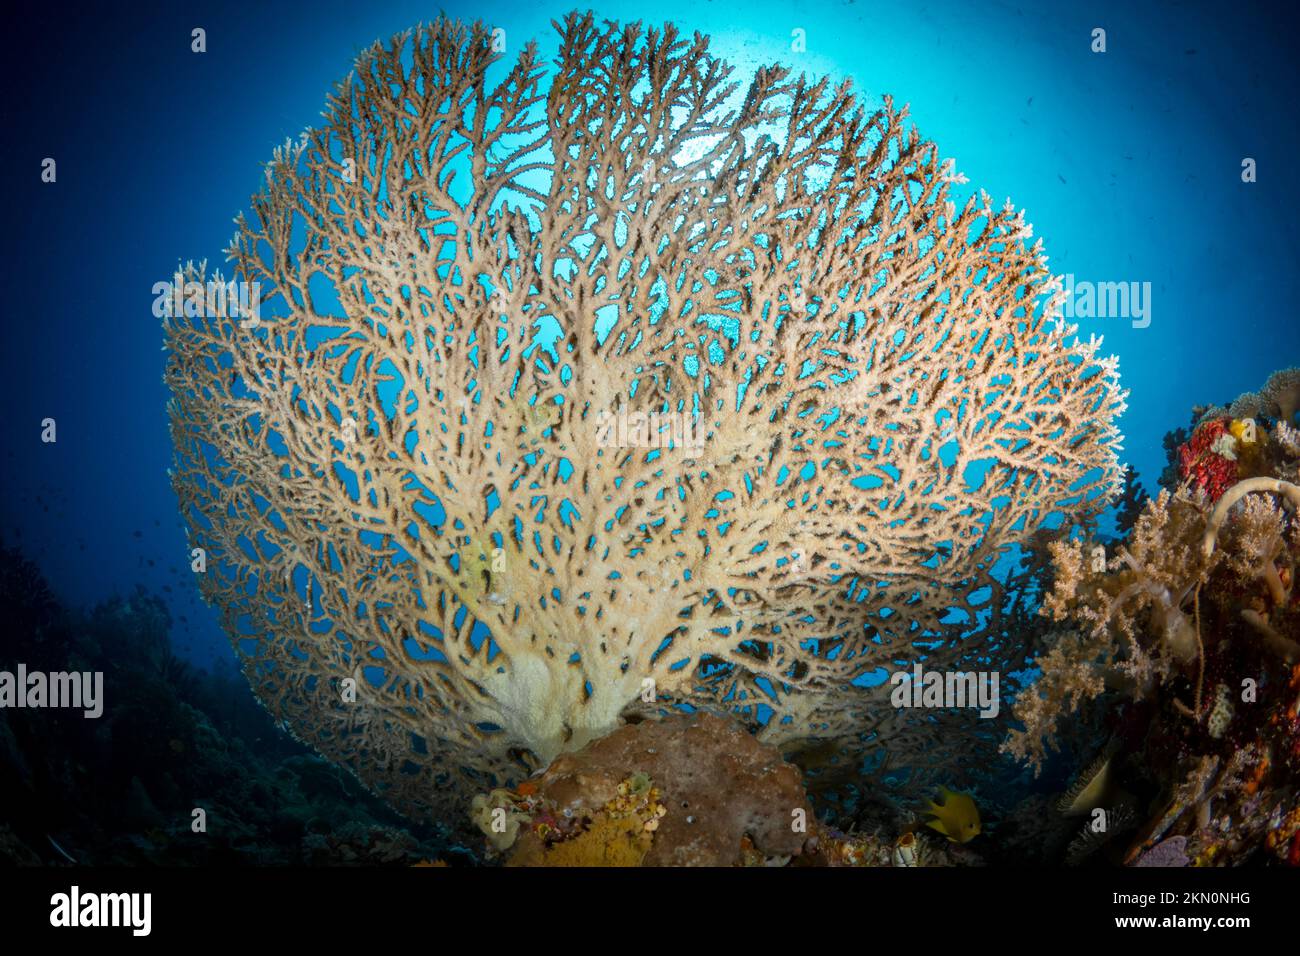 Pristine healthy hard coral garden on shallow coral reef in the Indo-pacific Stock Photo